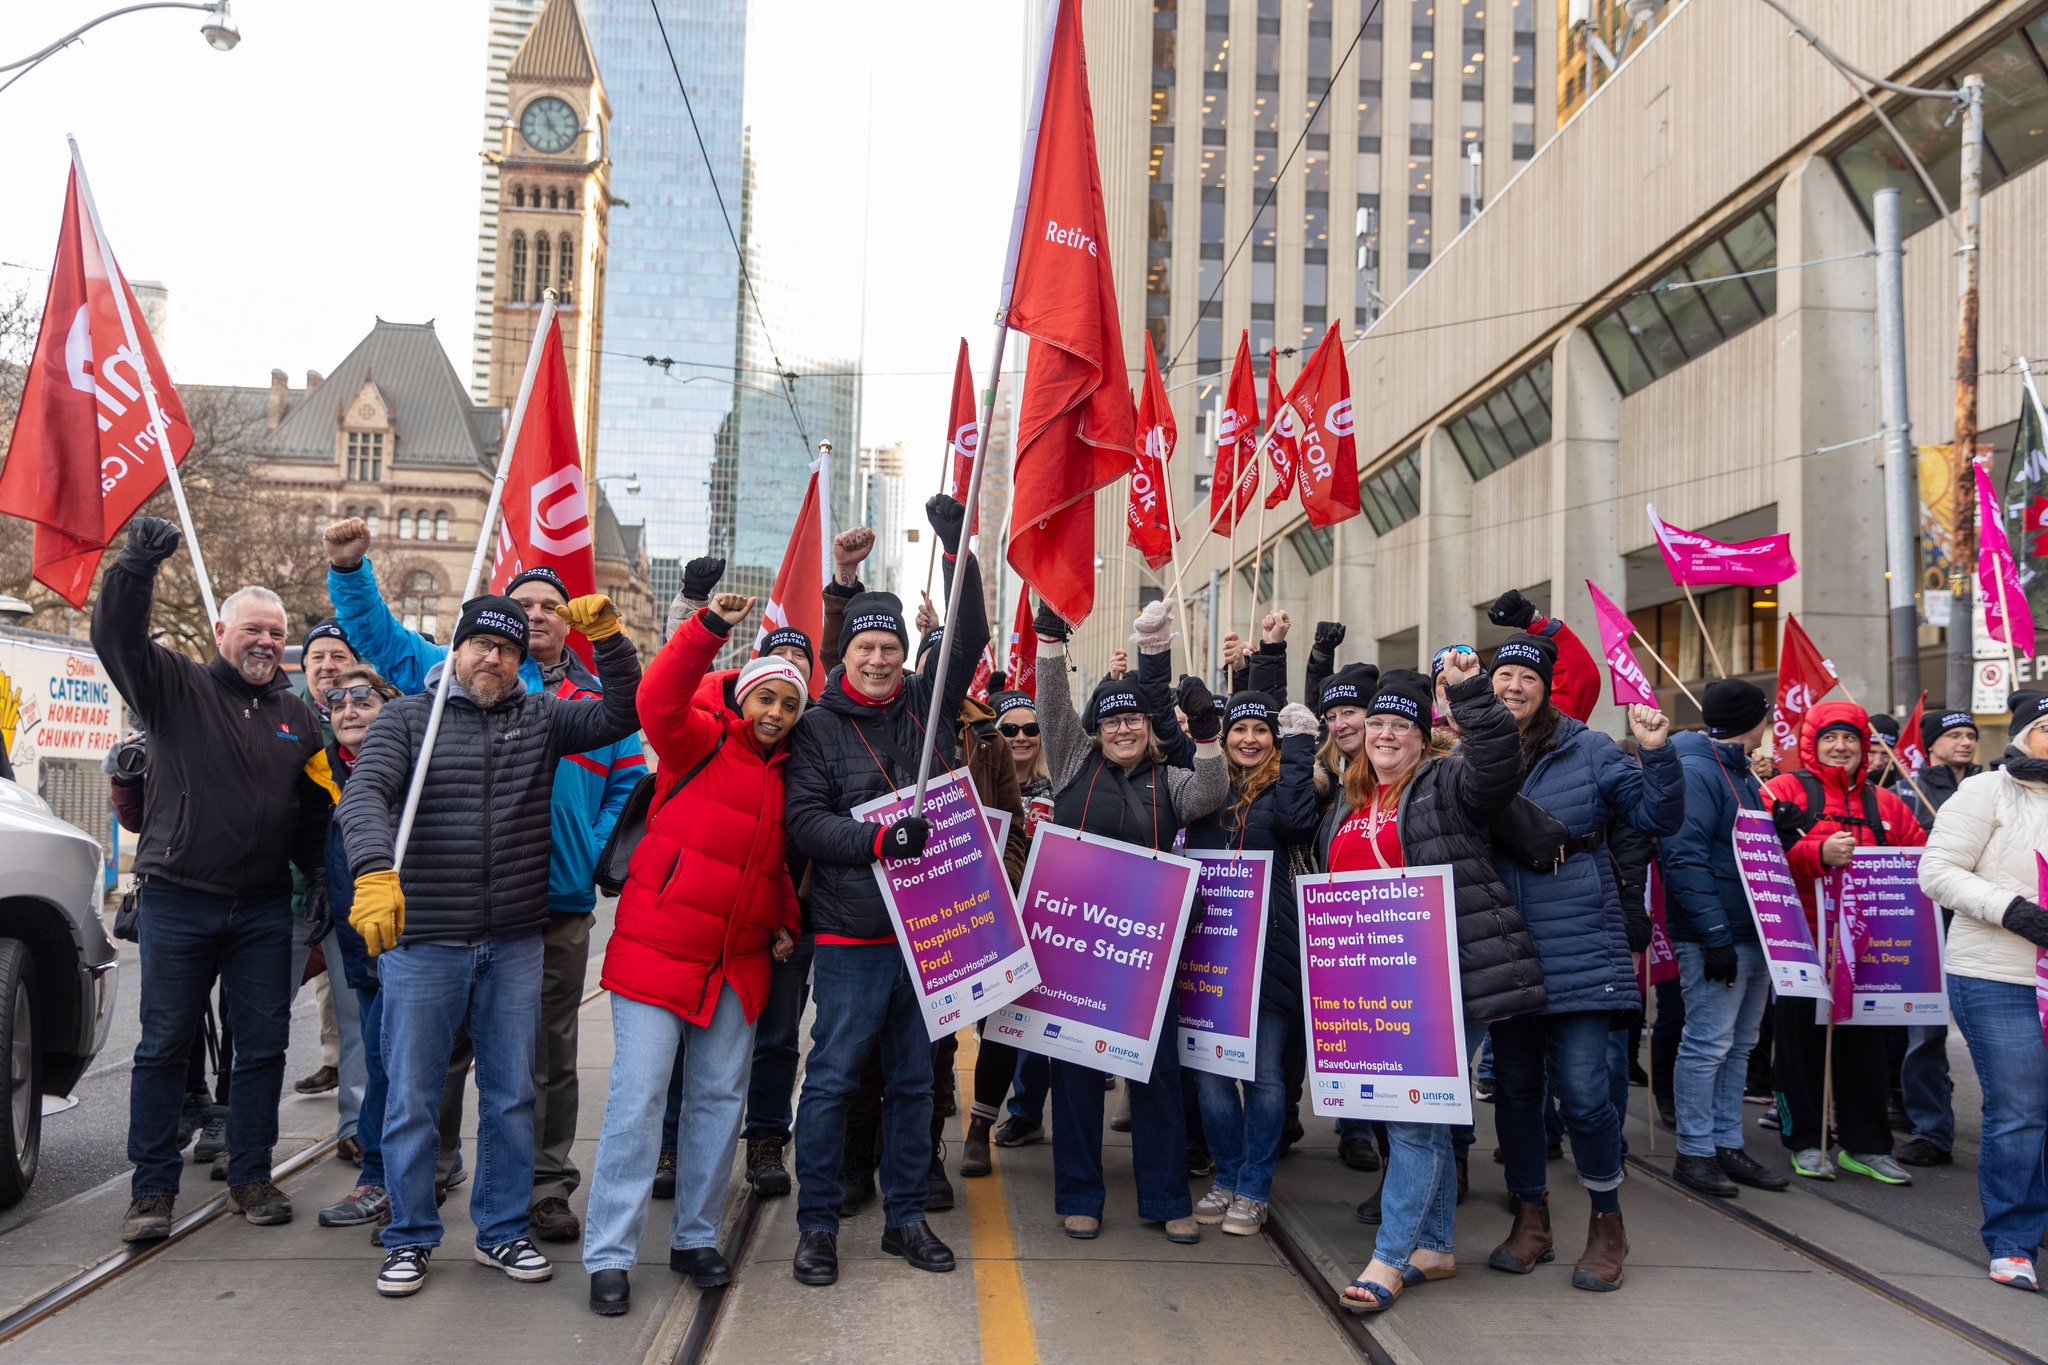 A large rally group holding Unifor flags